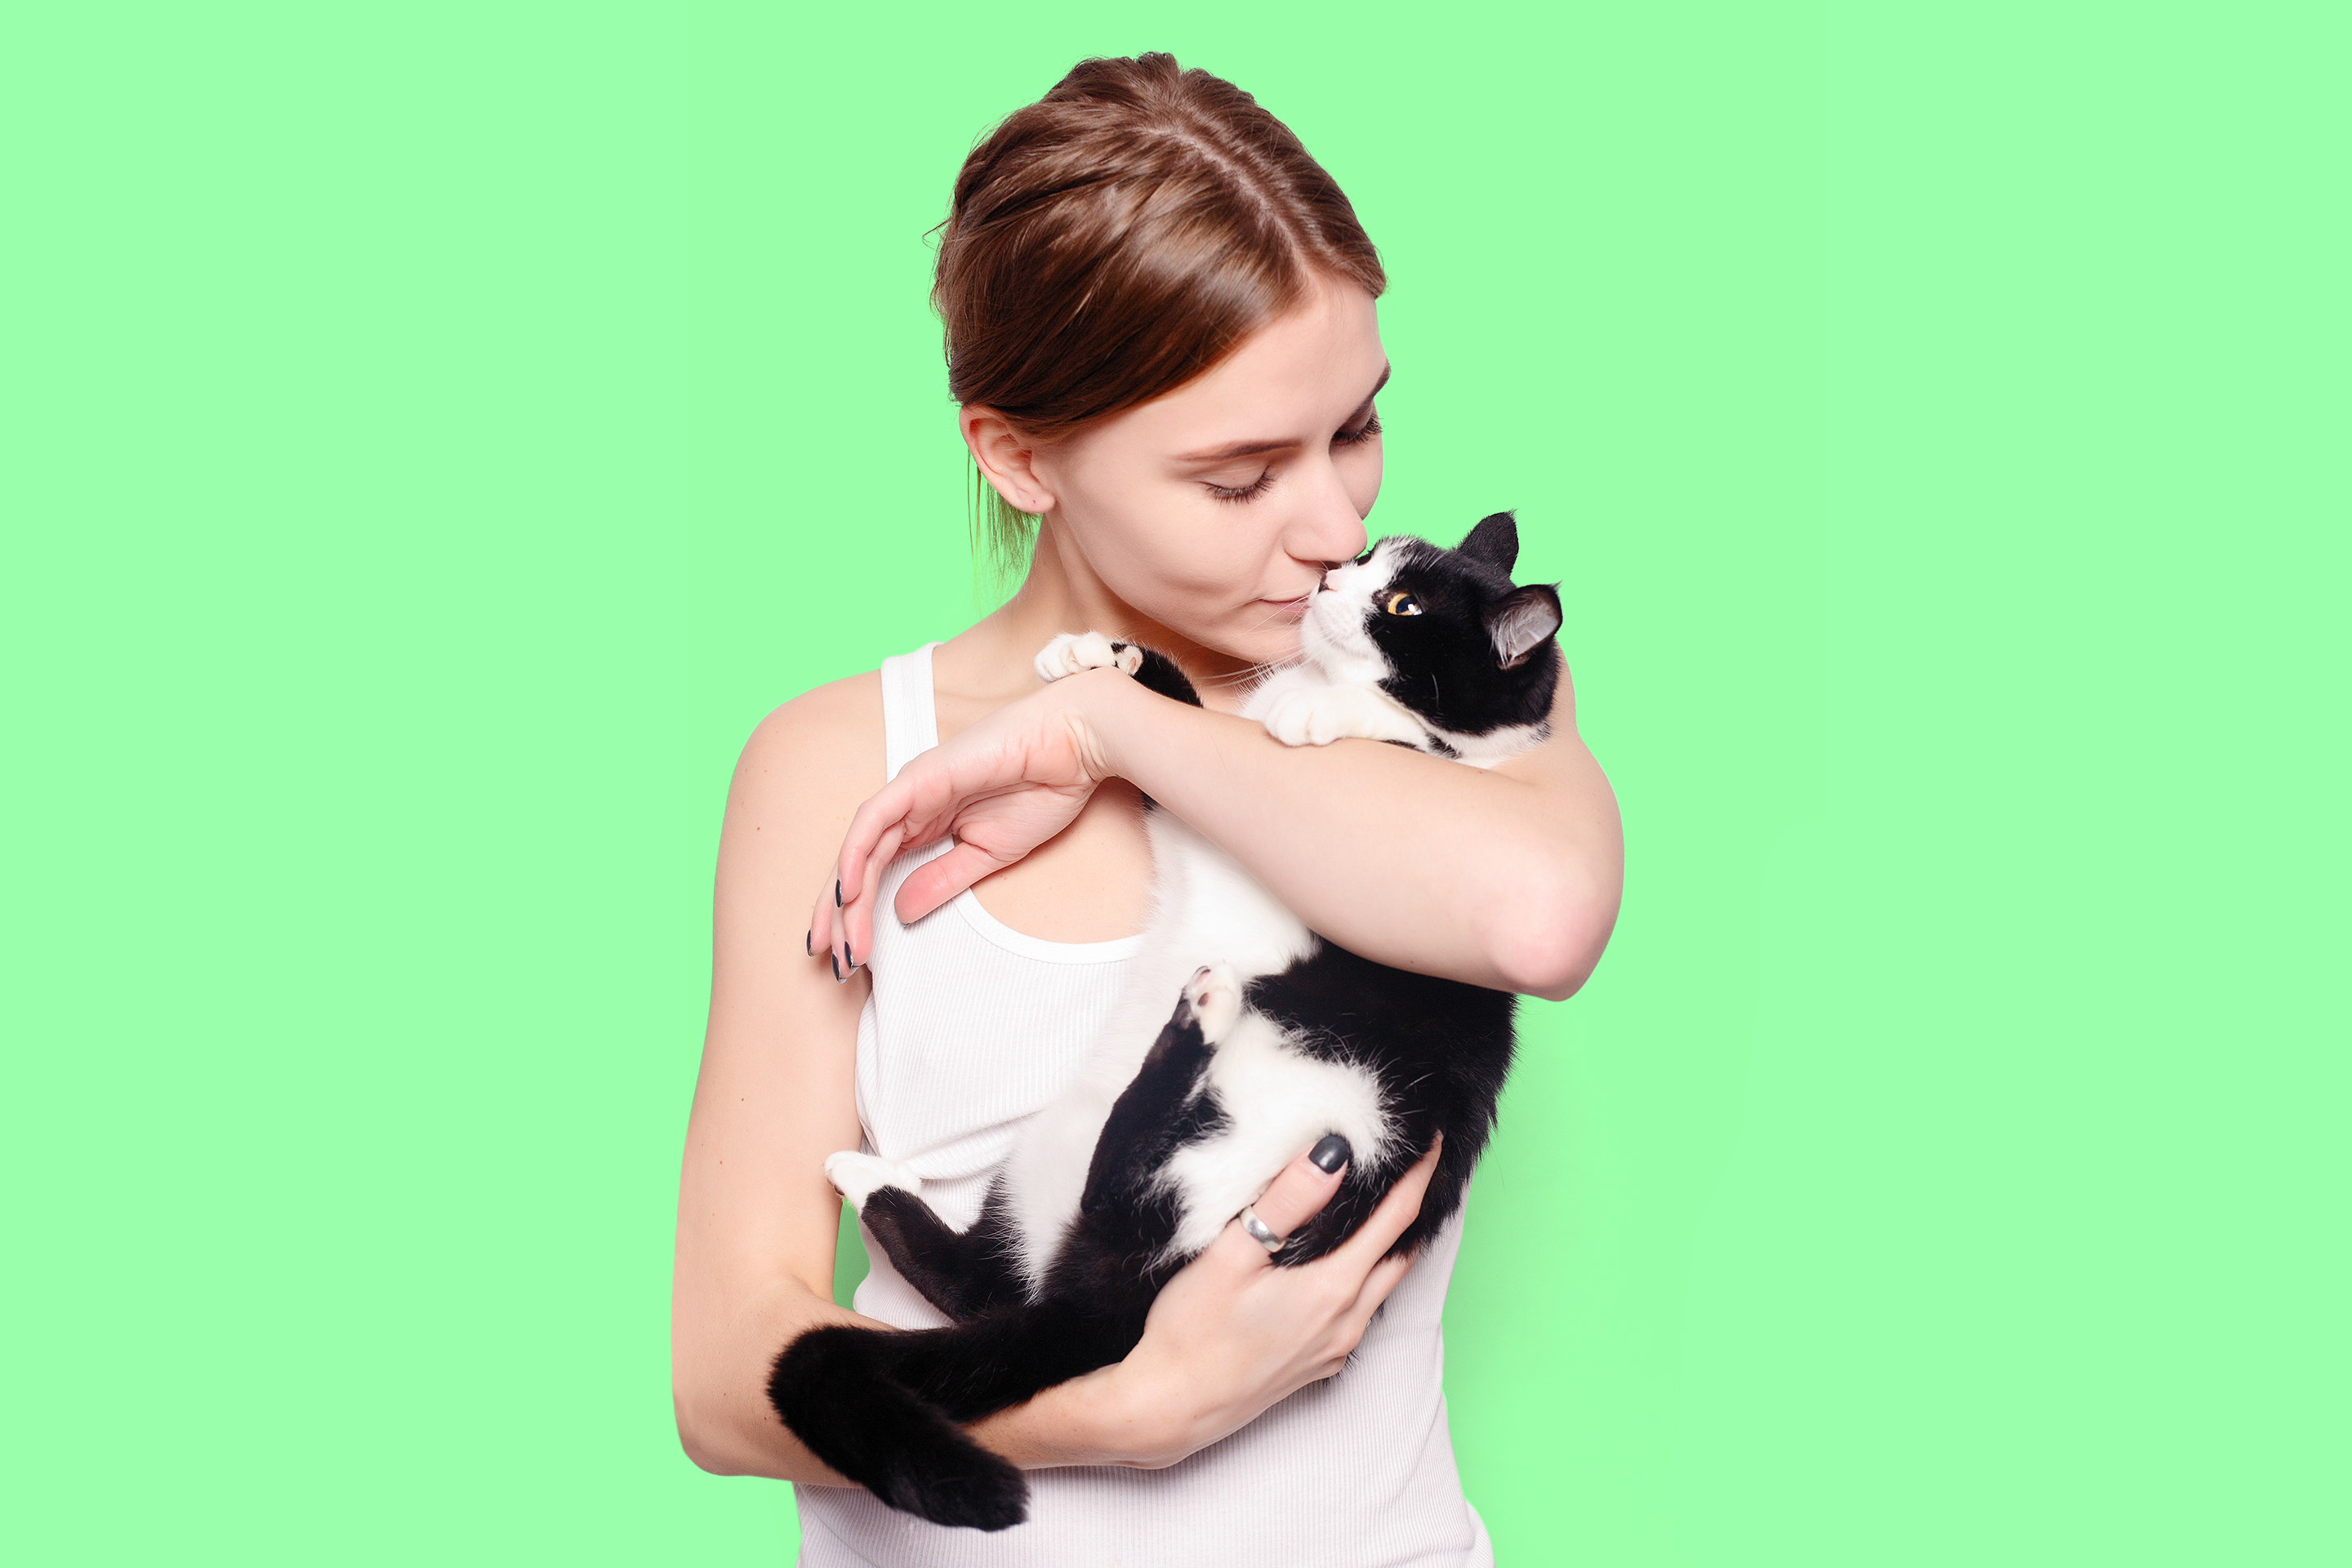 Woman with a cat in her arms